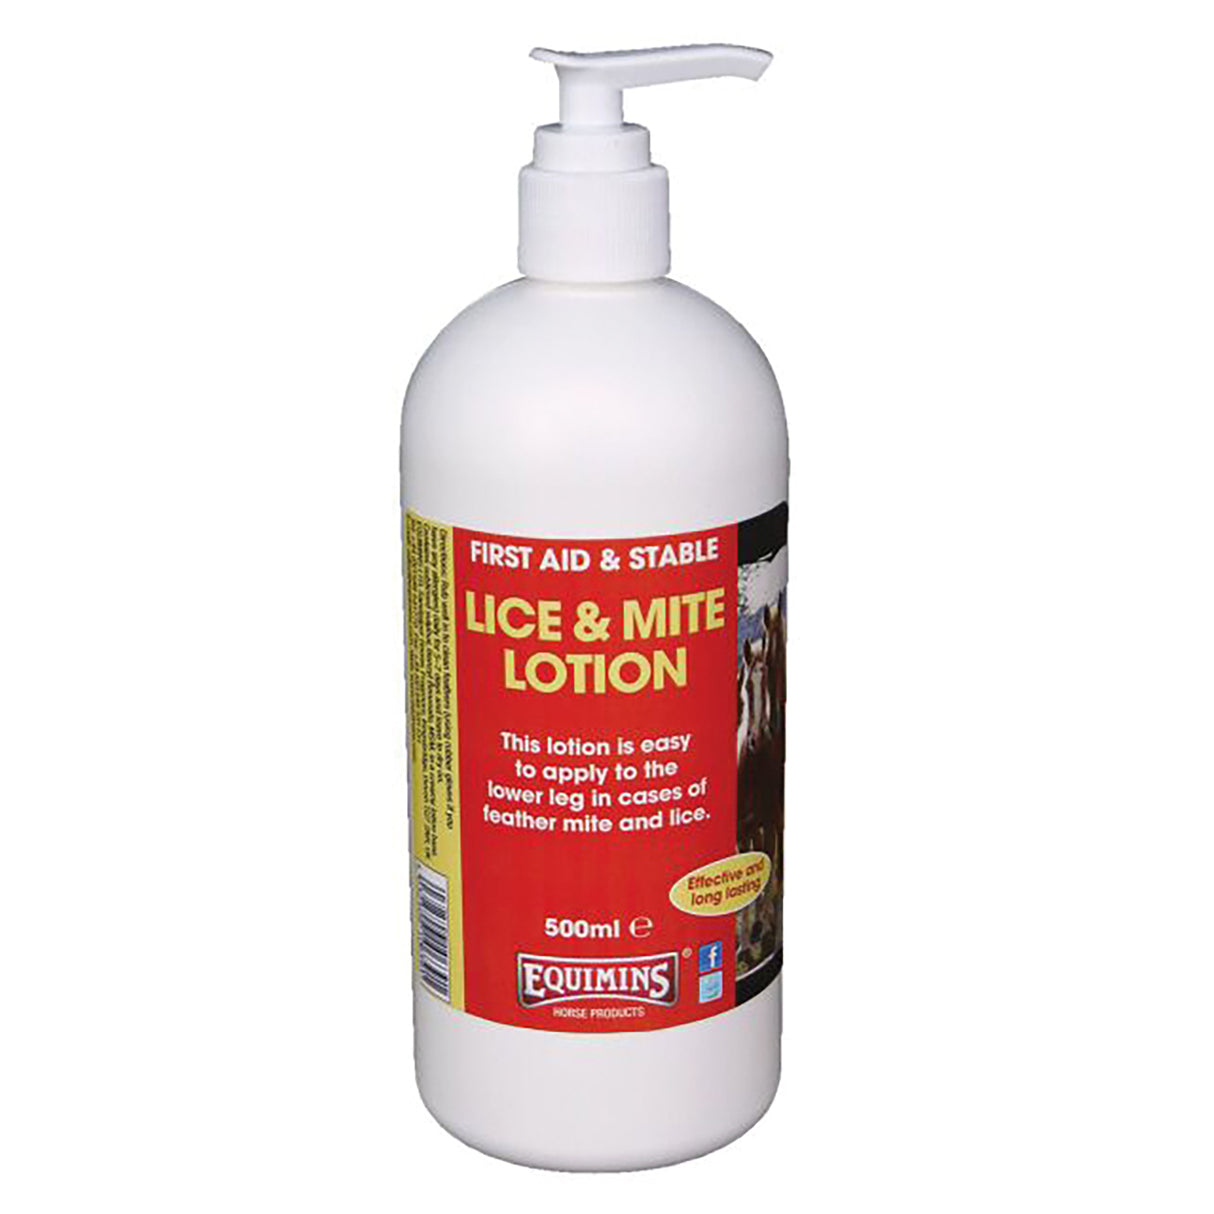 Equimins Mite & Lice Lotion